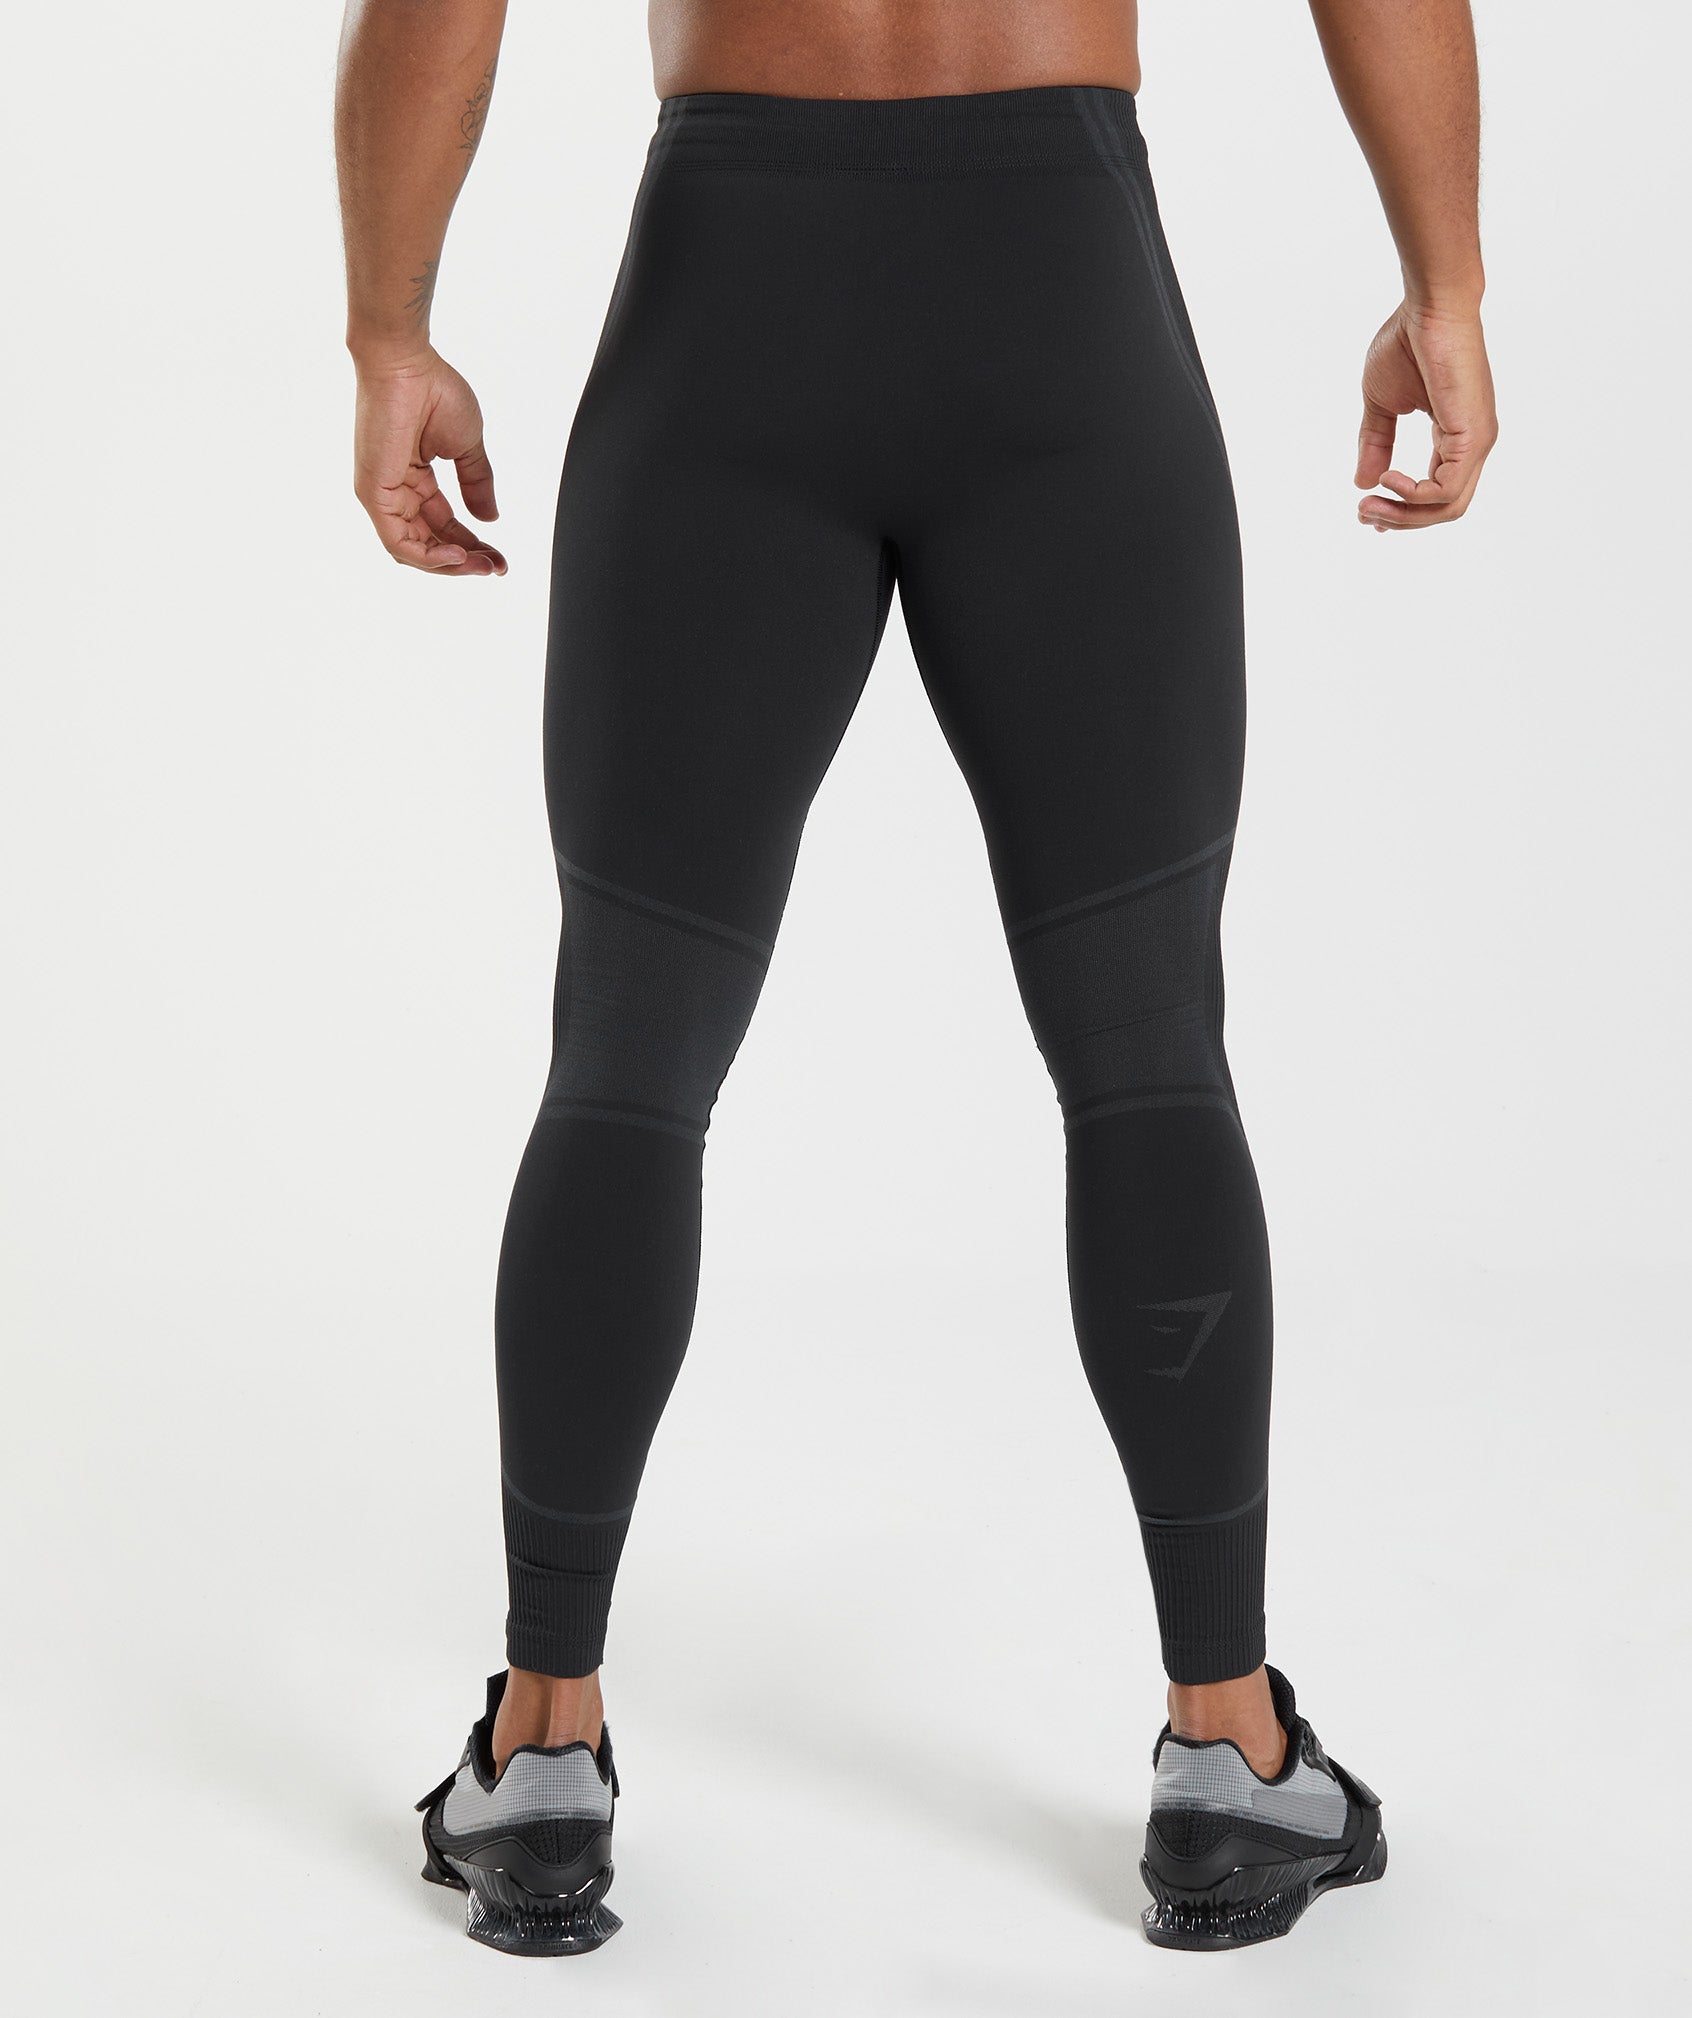 Men's running tights | 4F: Sportswear and shoes